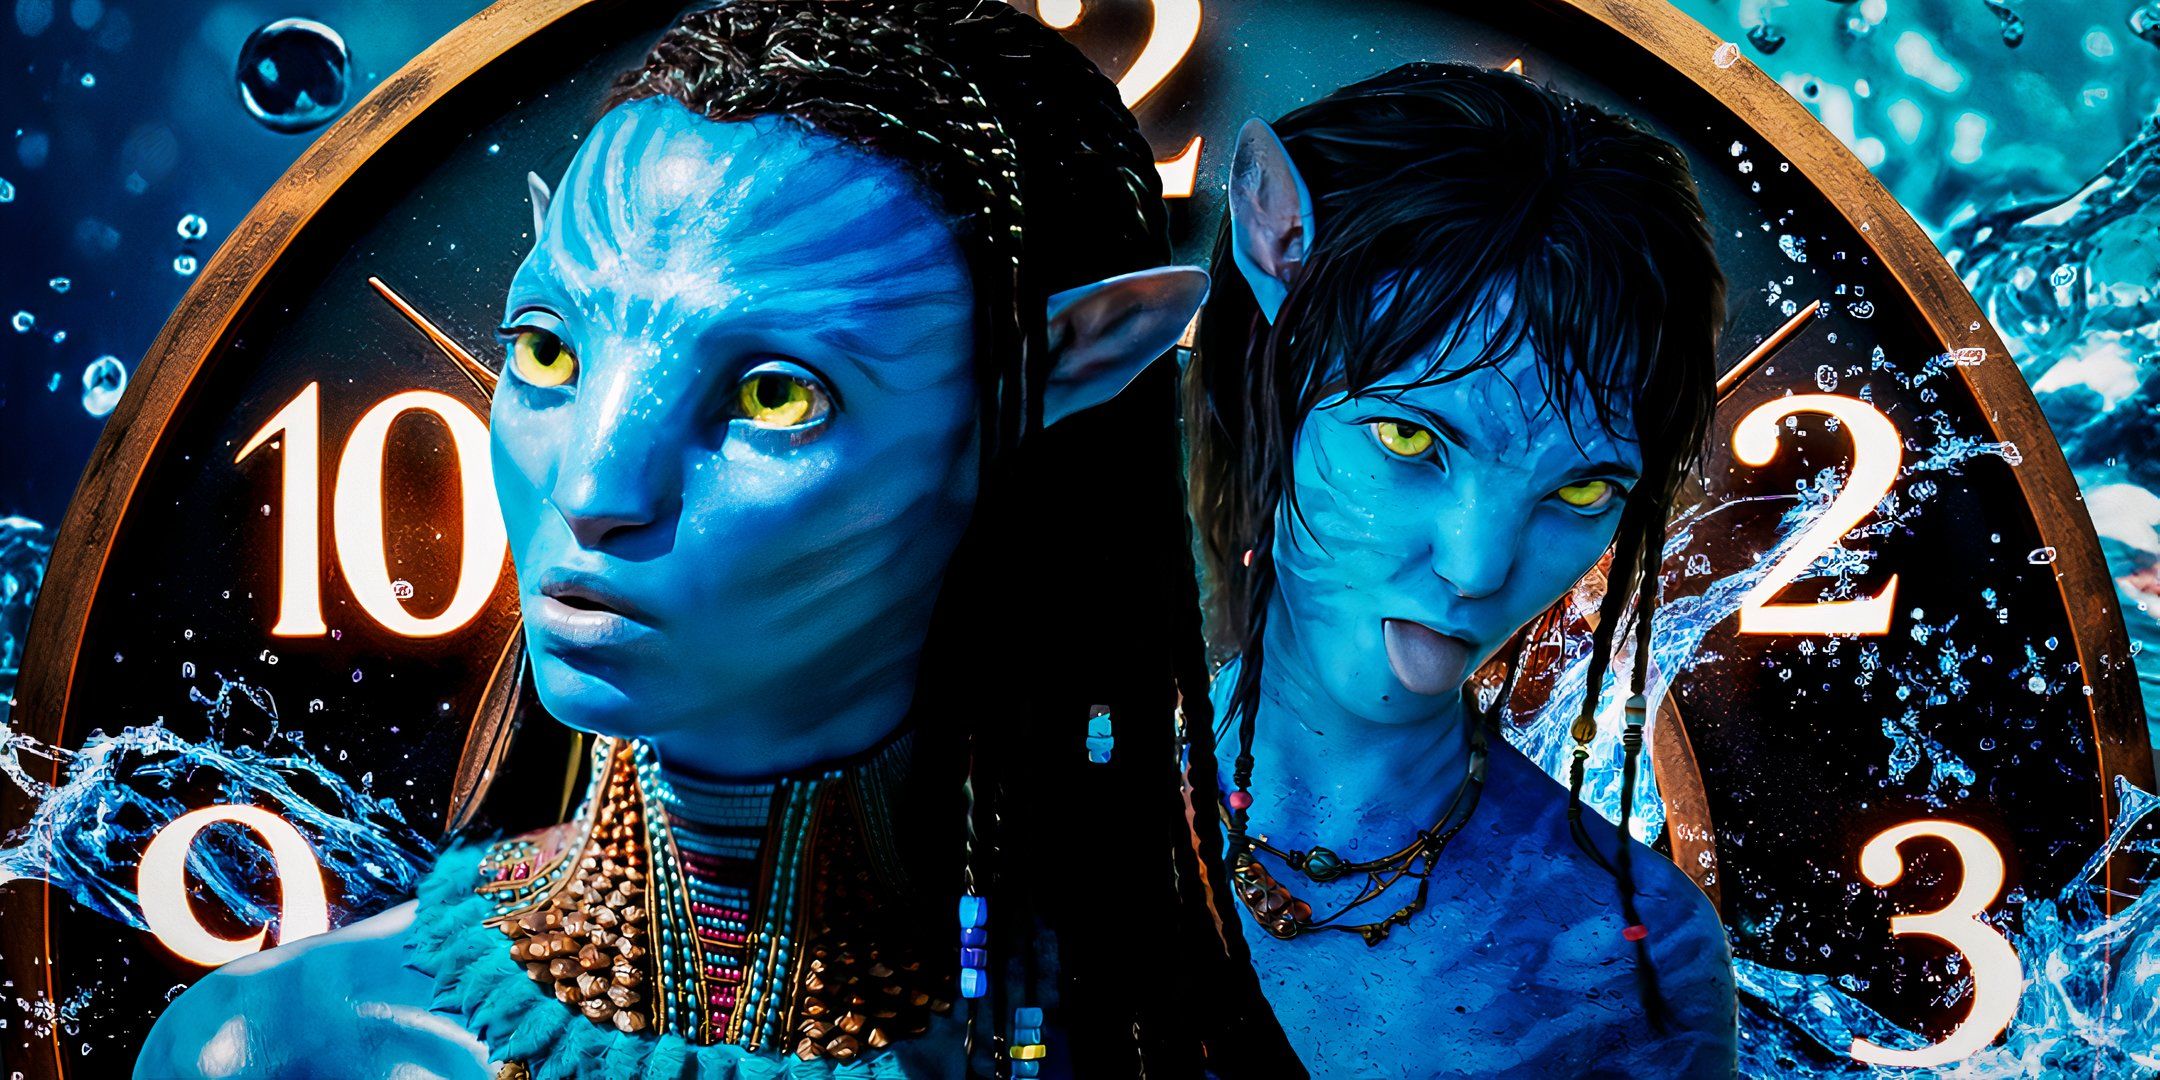 Characters from James Cameron's Avatar franchose.